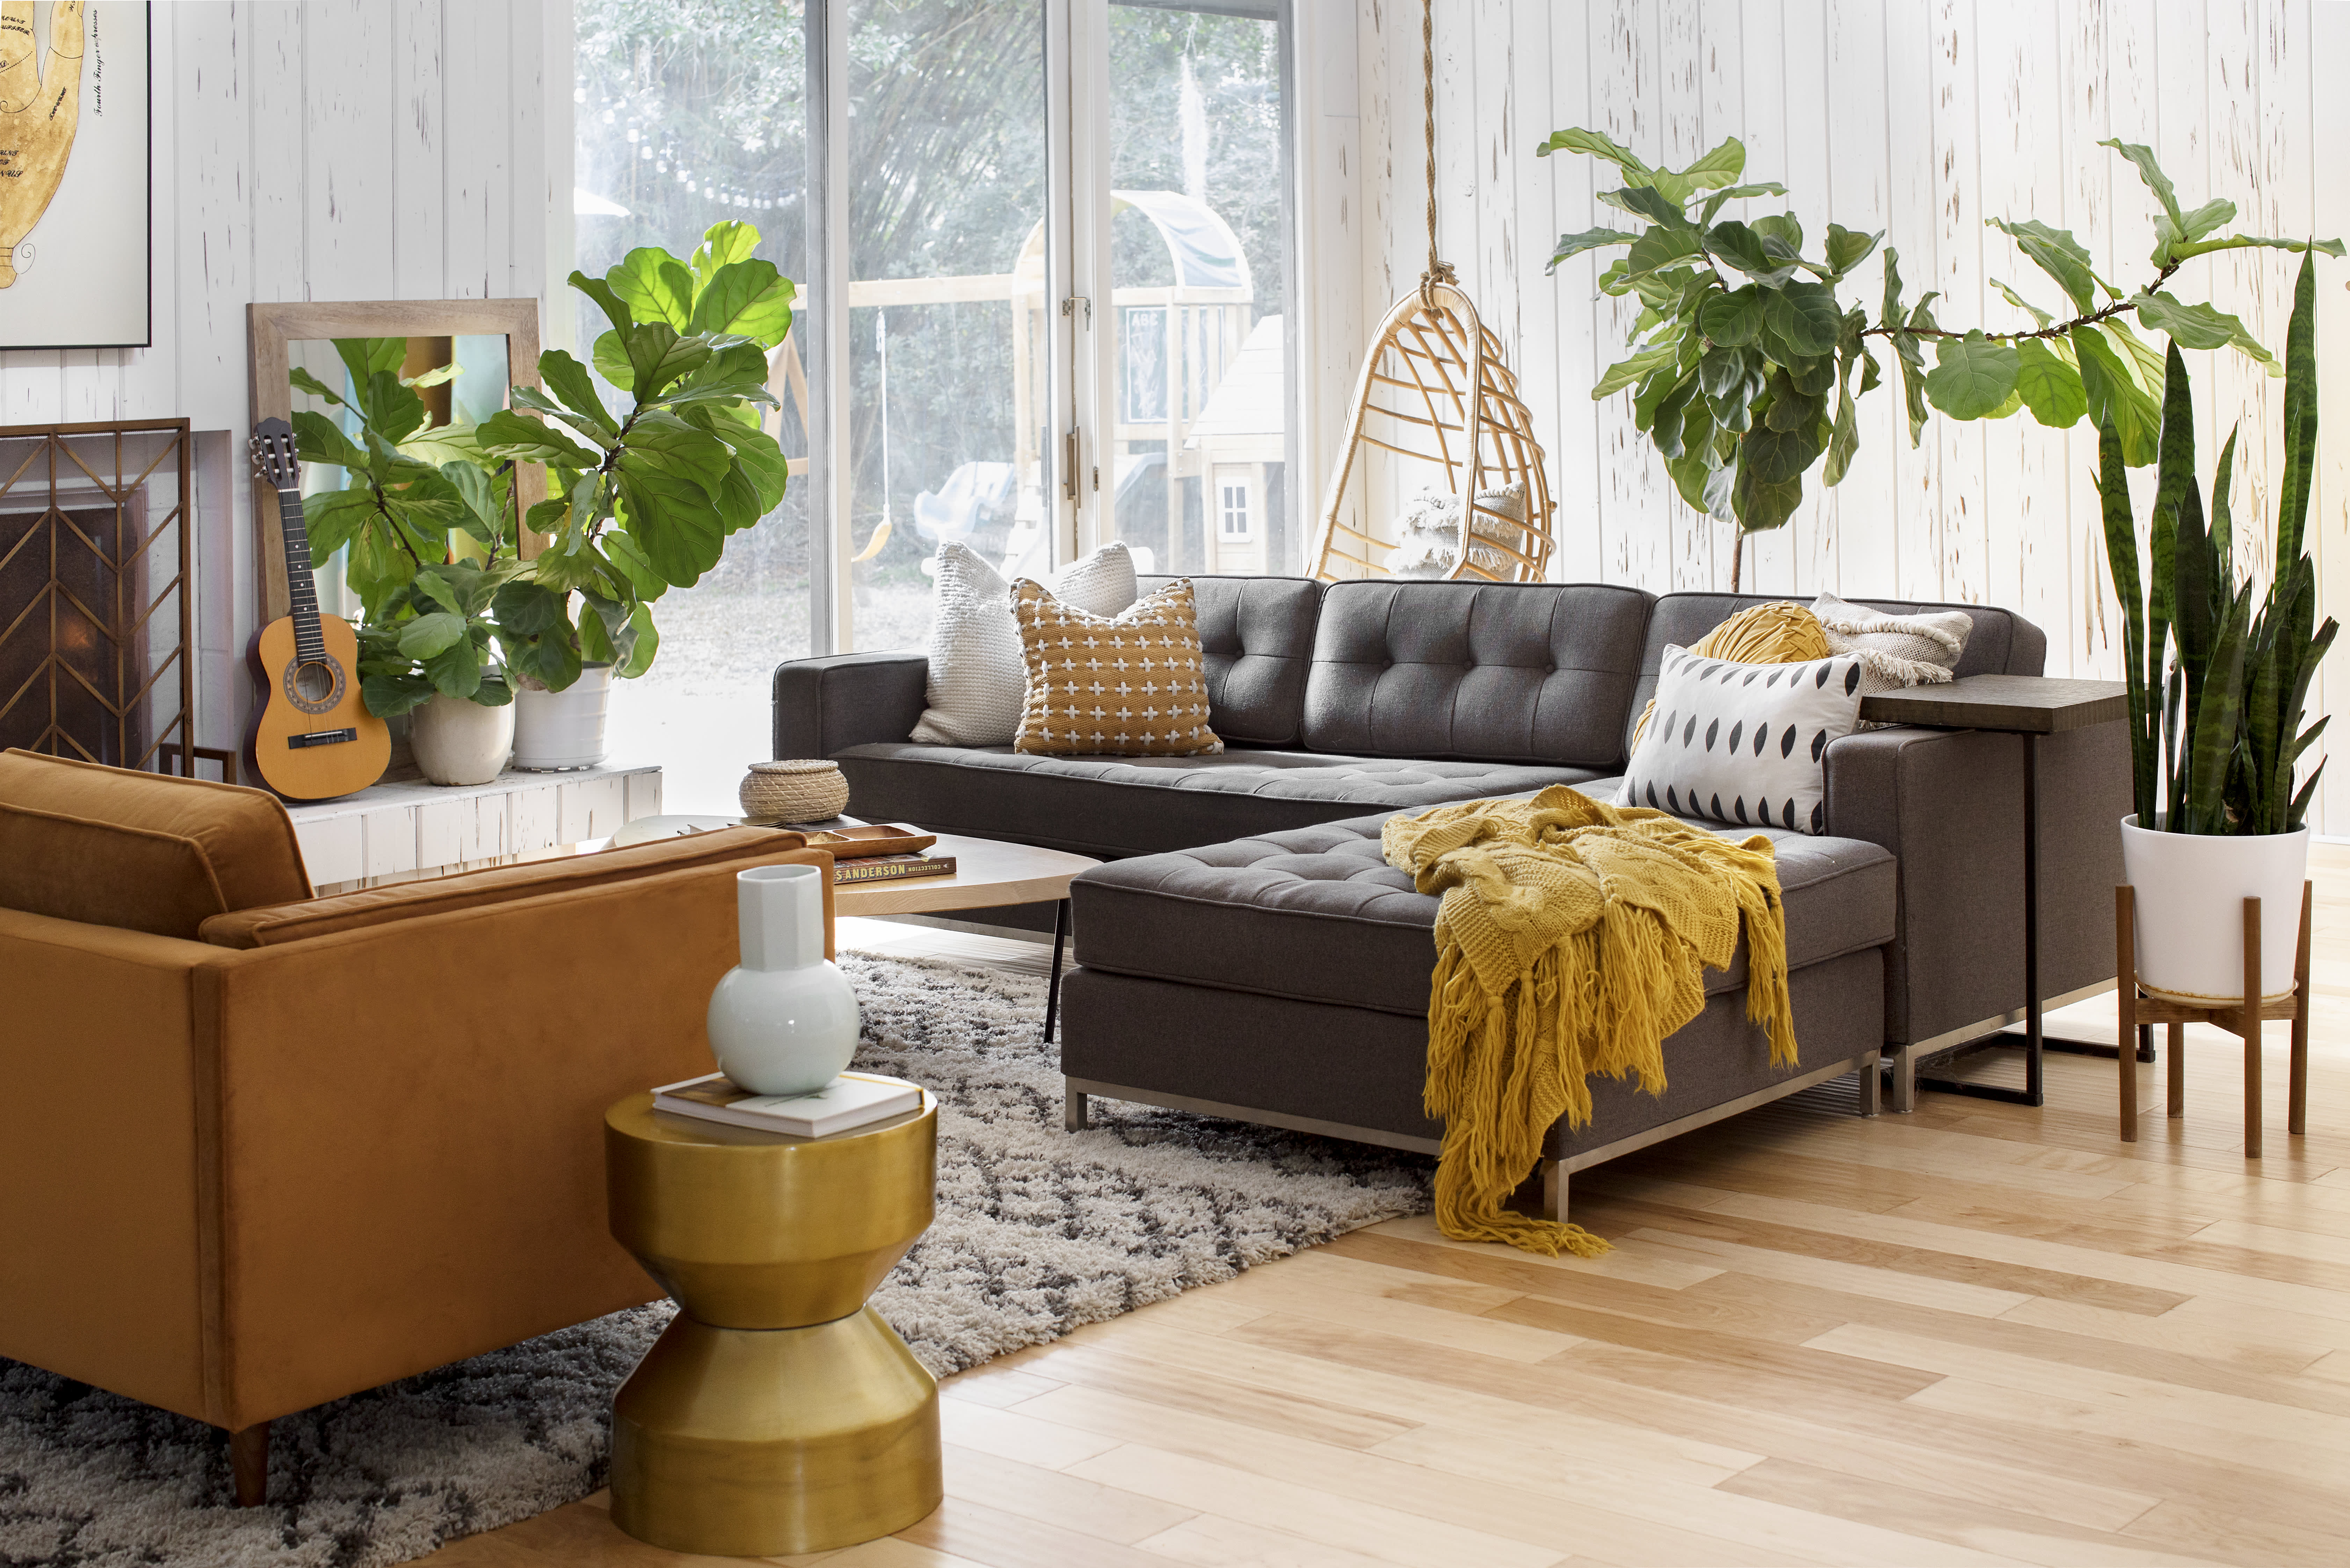 Living Rooms vs. Family Rooms: 5 Differences from Experts